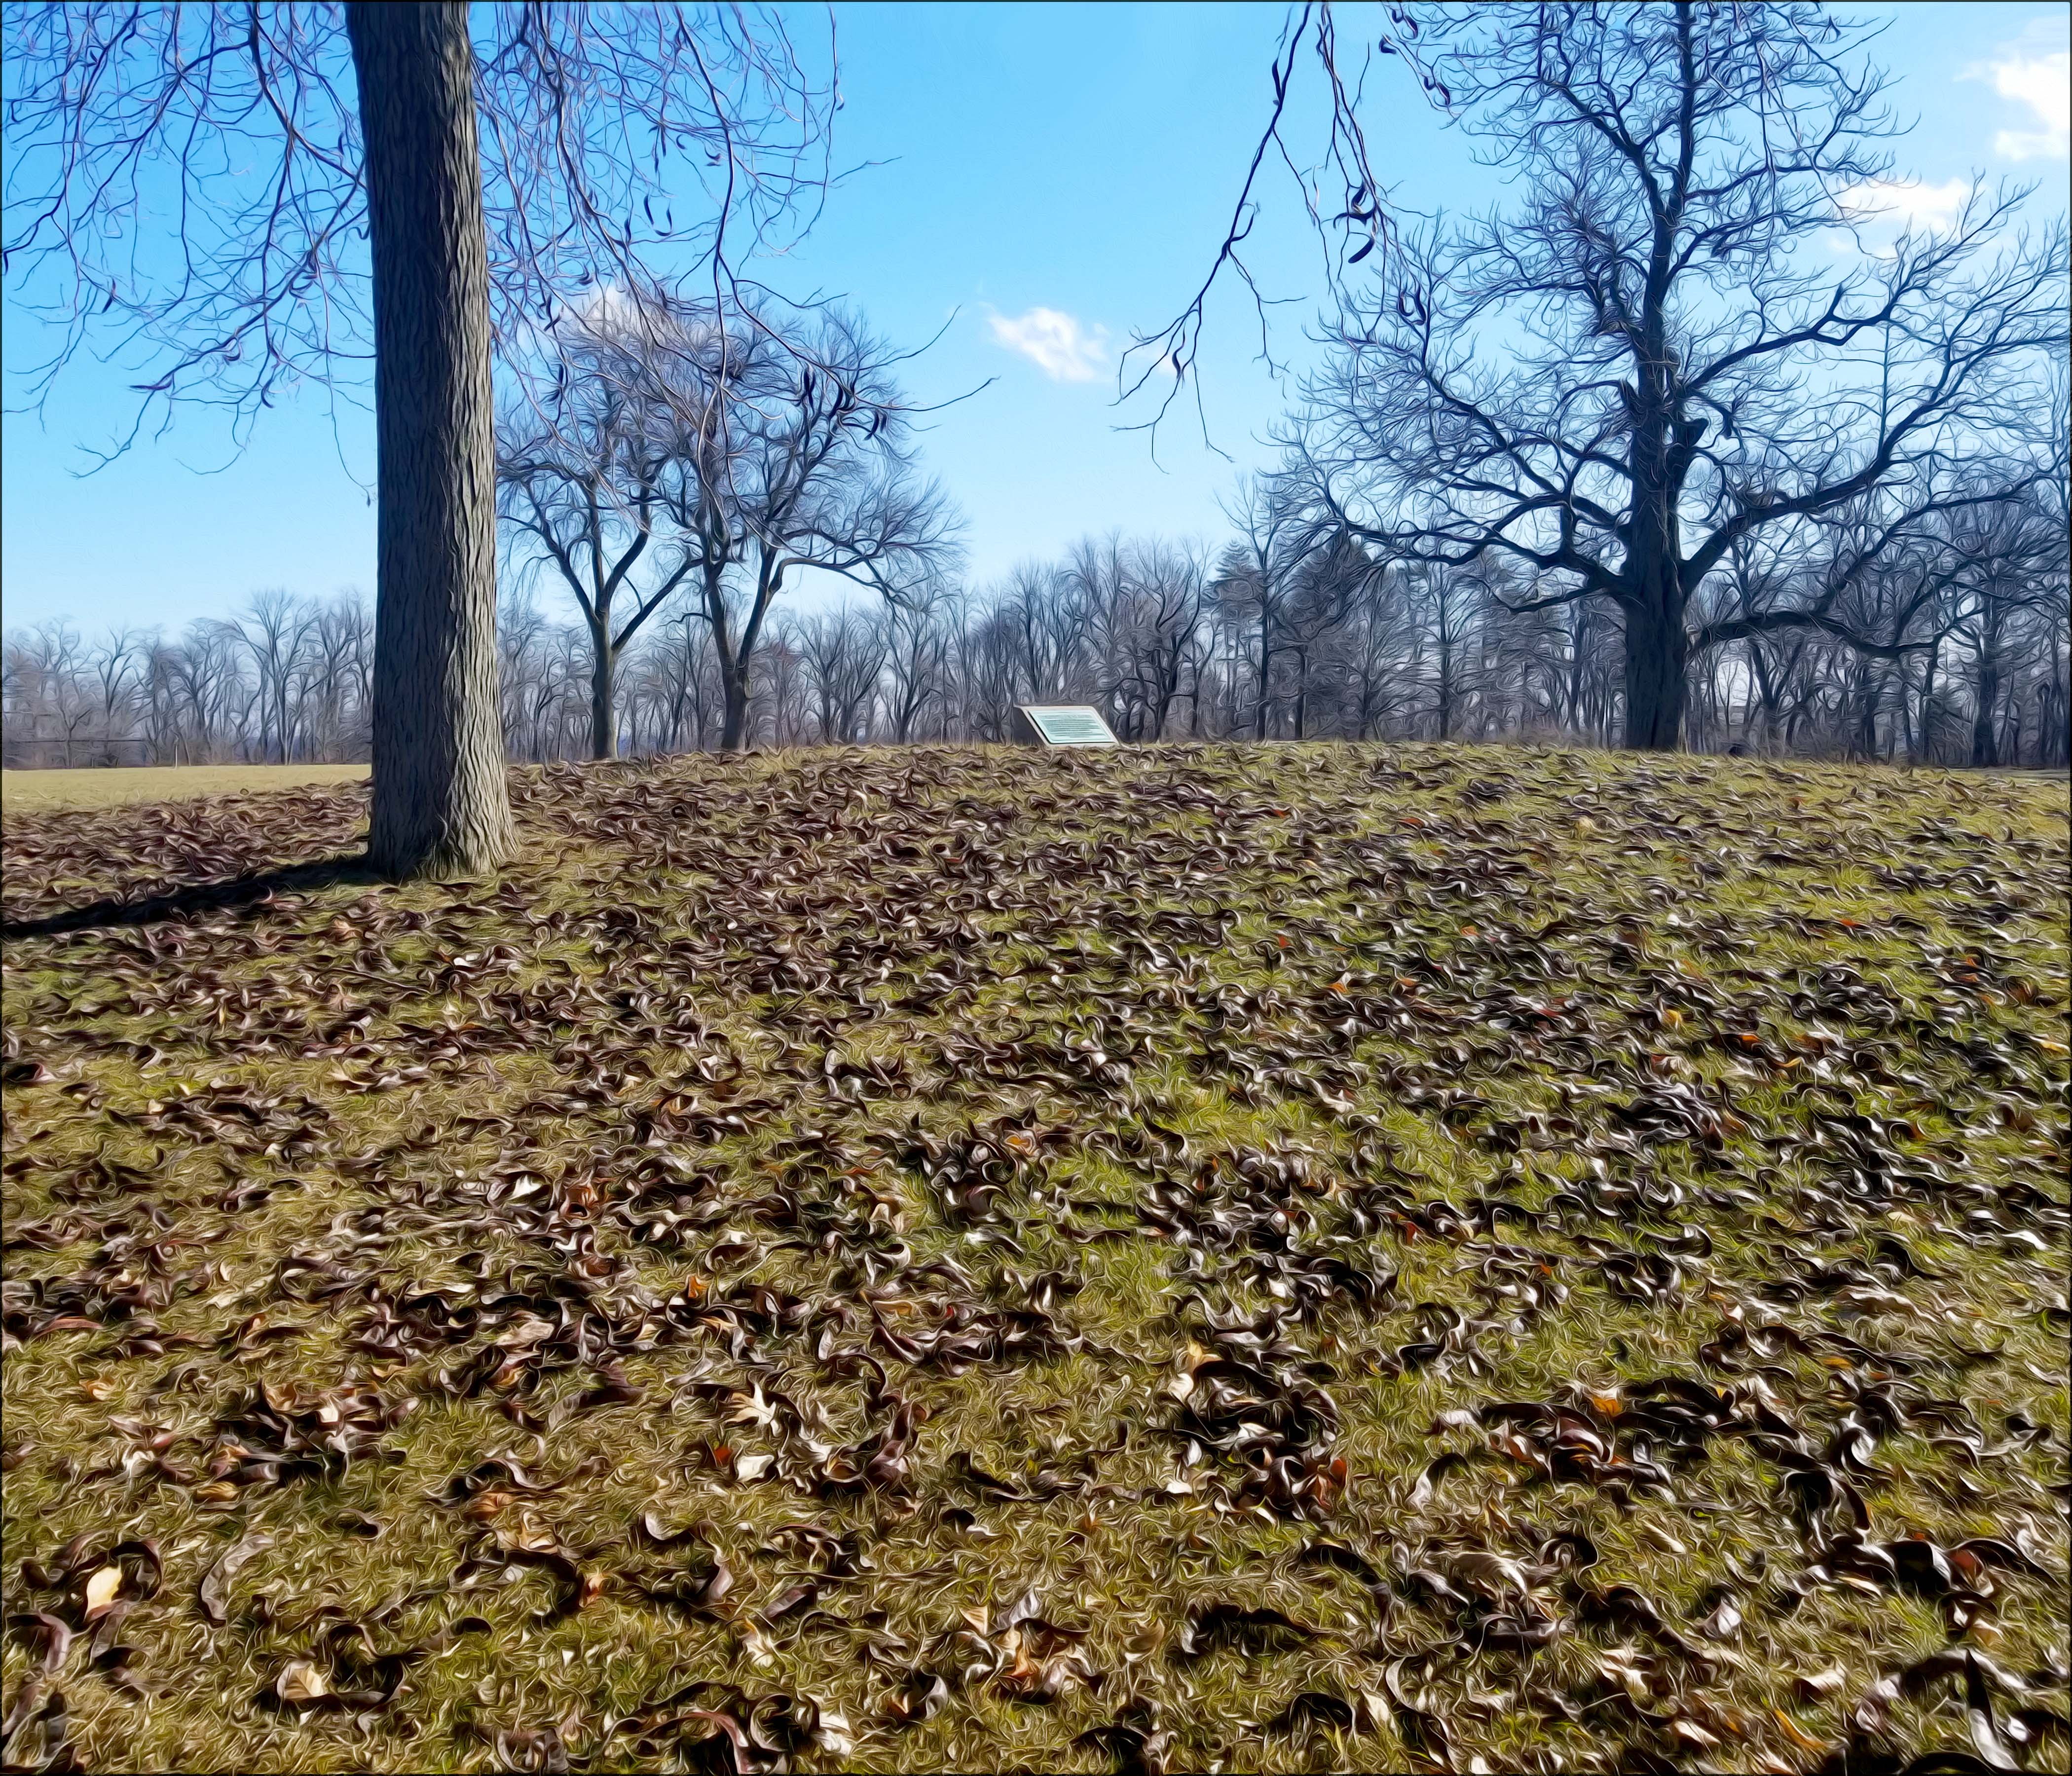 Lake Park remains the only local site left with an intact Indigenous burial mound. In Milwaukee County, there is little evidence left of the existence of our three First Nations.